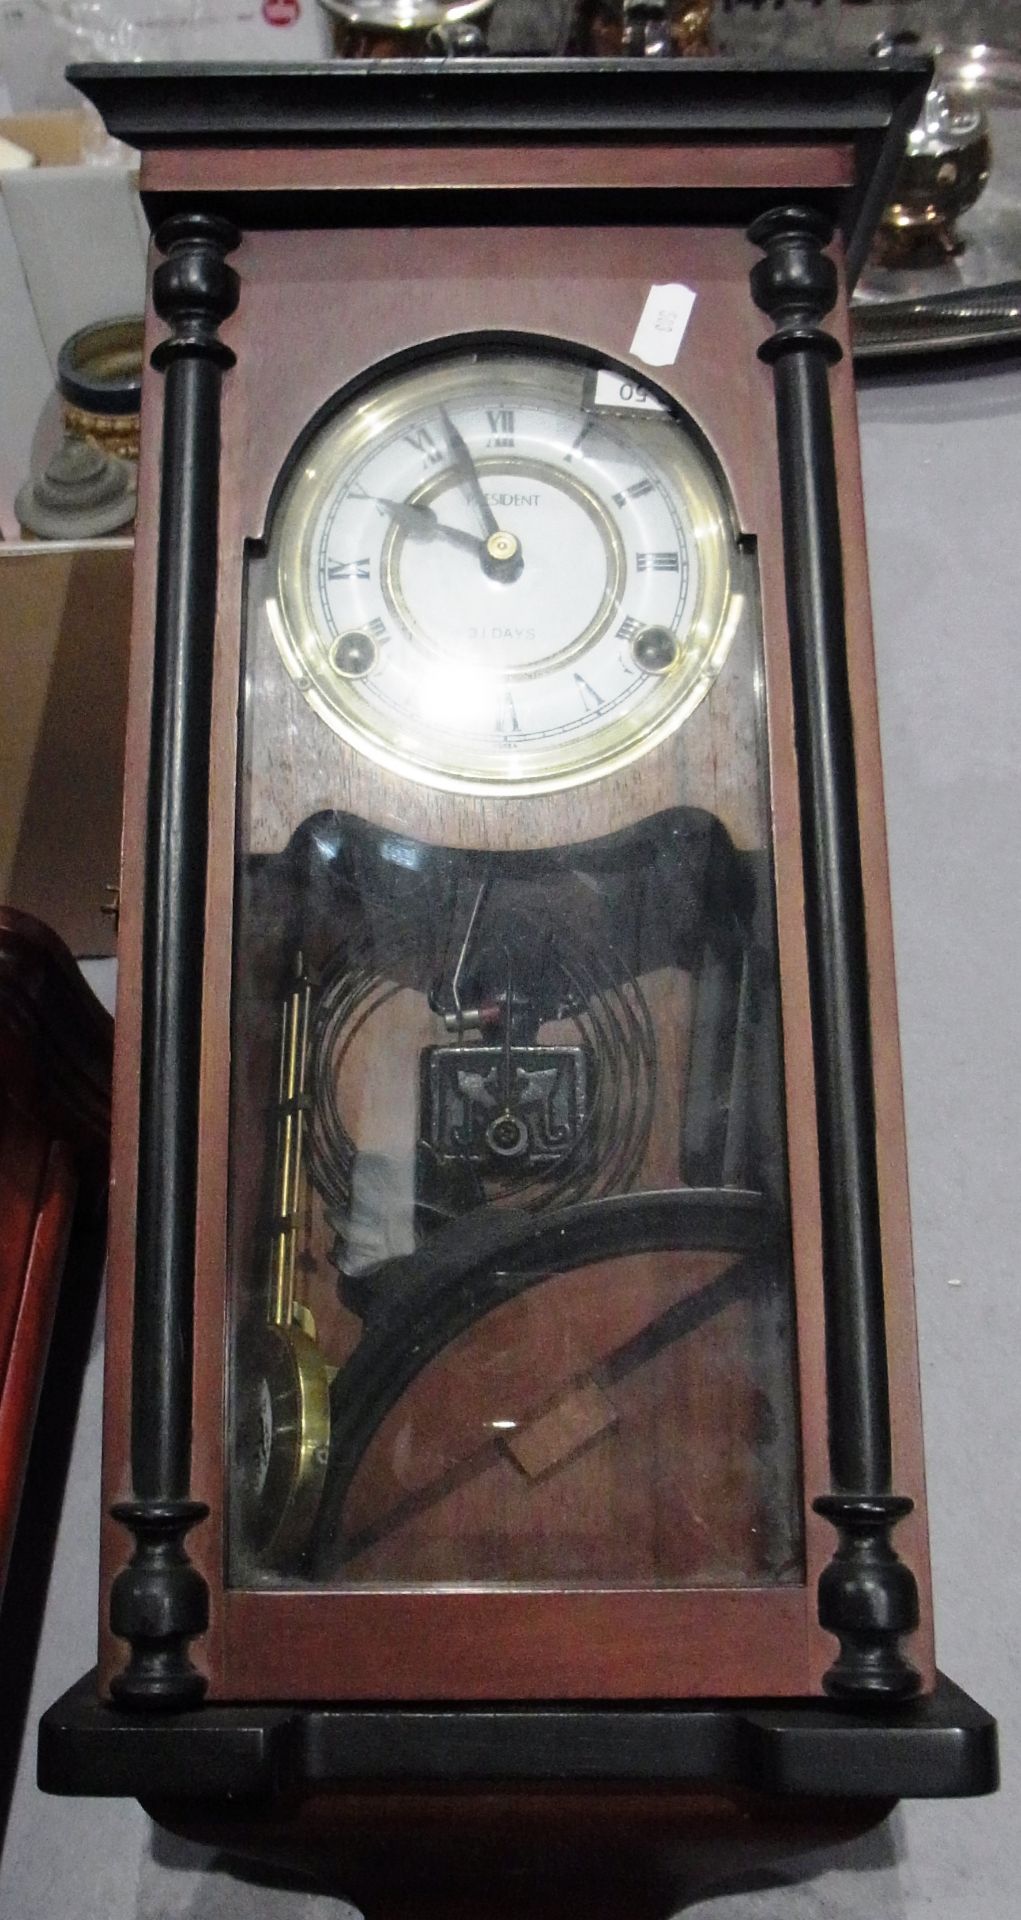 President 31 day pendulum wall clock with key 20" - Image 2 of 2